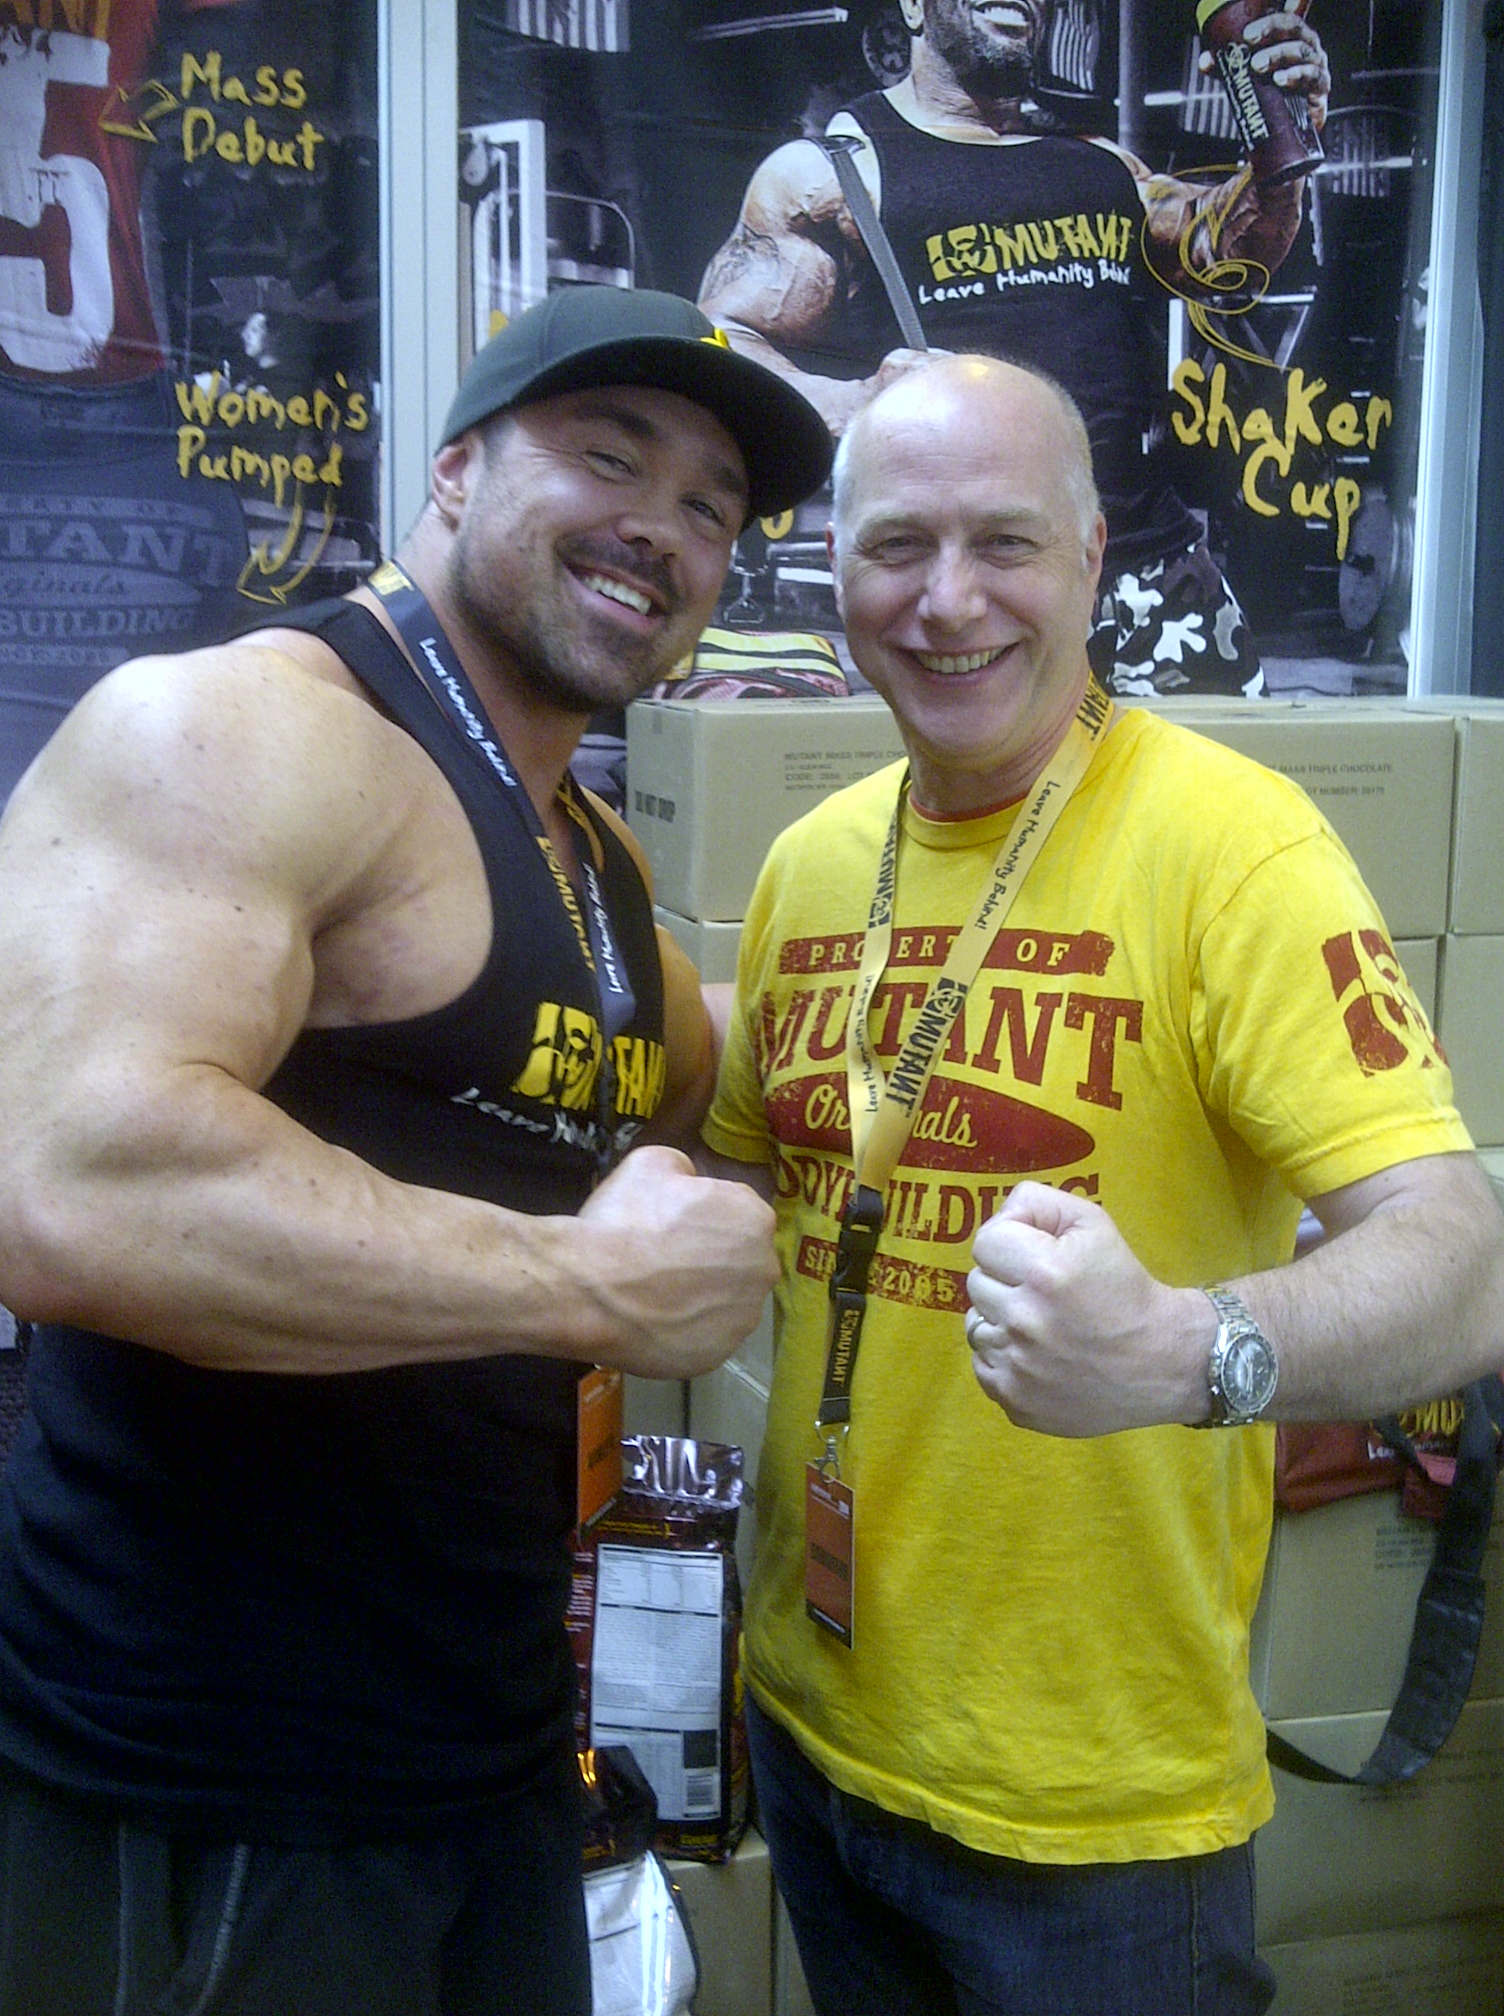 The Audio Suite's Neil Hillman with Mutant Nation's 'Big Ron' Partlow. PA Mixer / Live to Air Mixer on youtube 'officialmutanttv' at BodyPowerExpo, May 2014. Channel stats: over 30 million hits, over 150,000 subscribers.